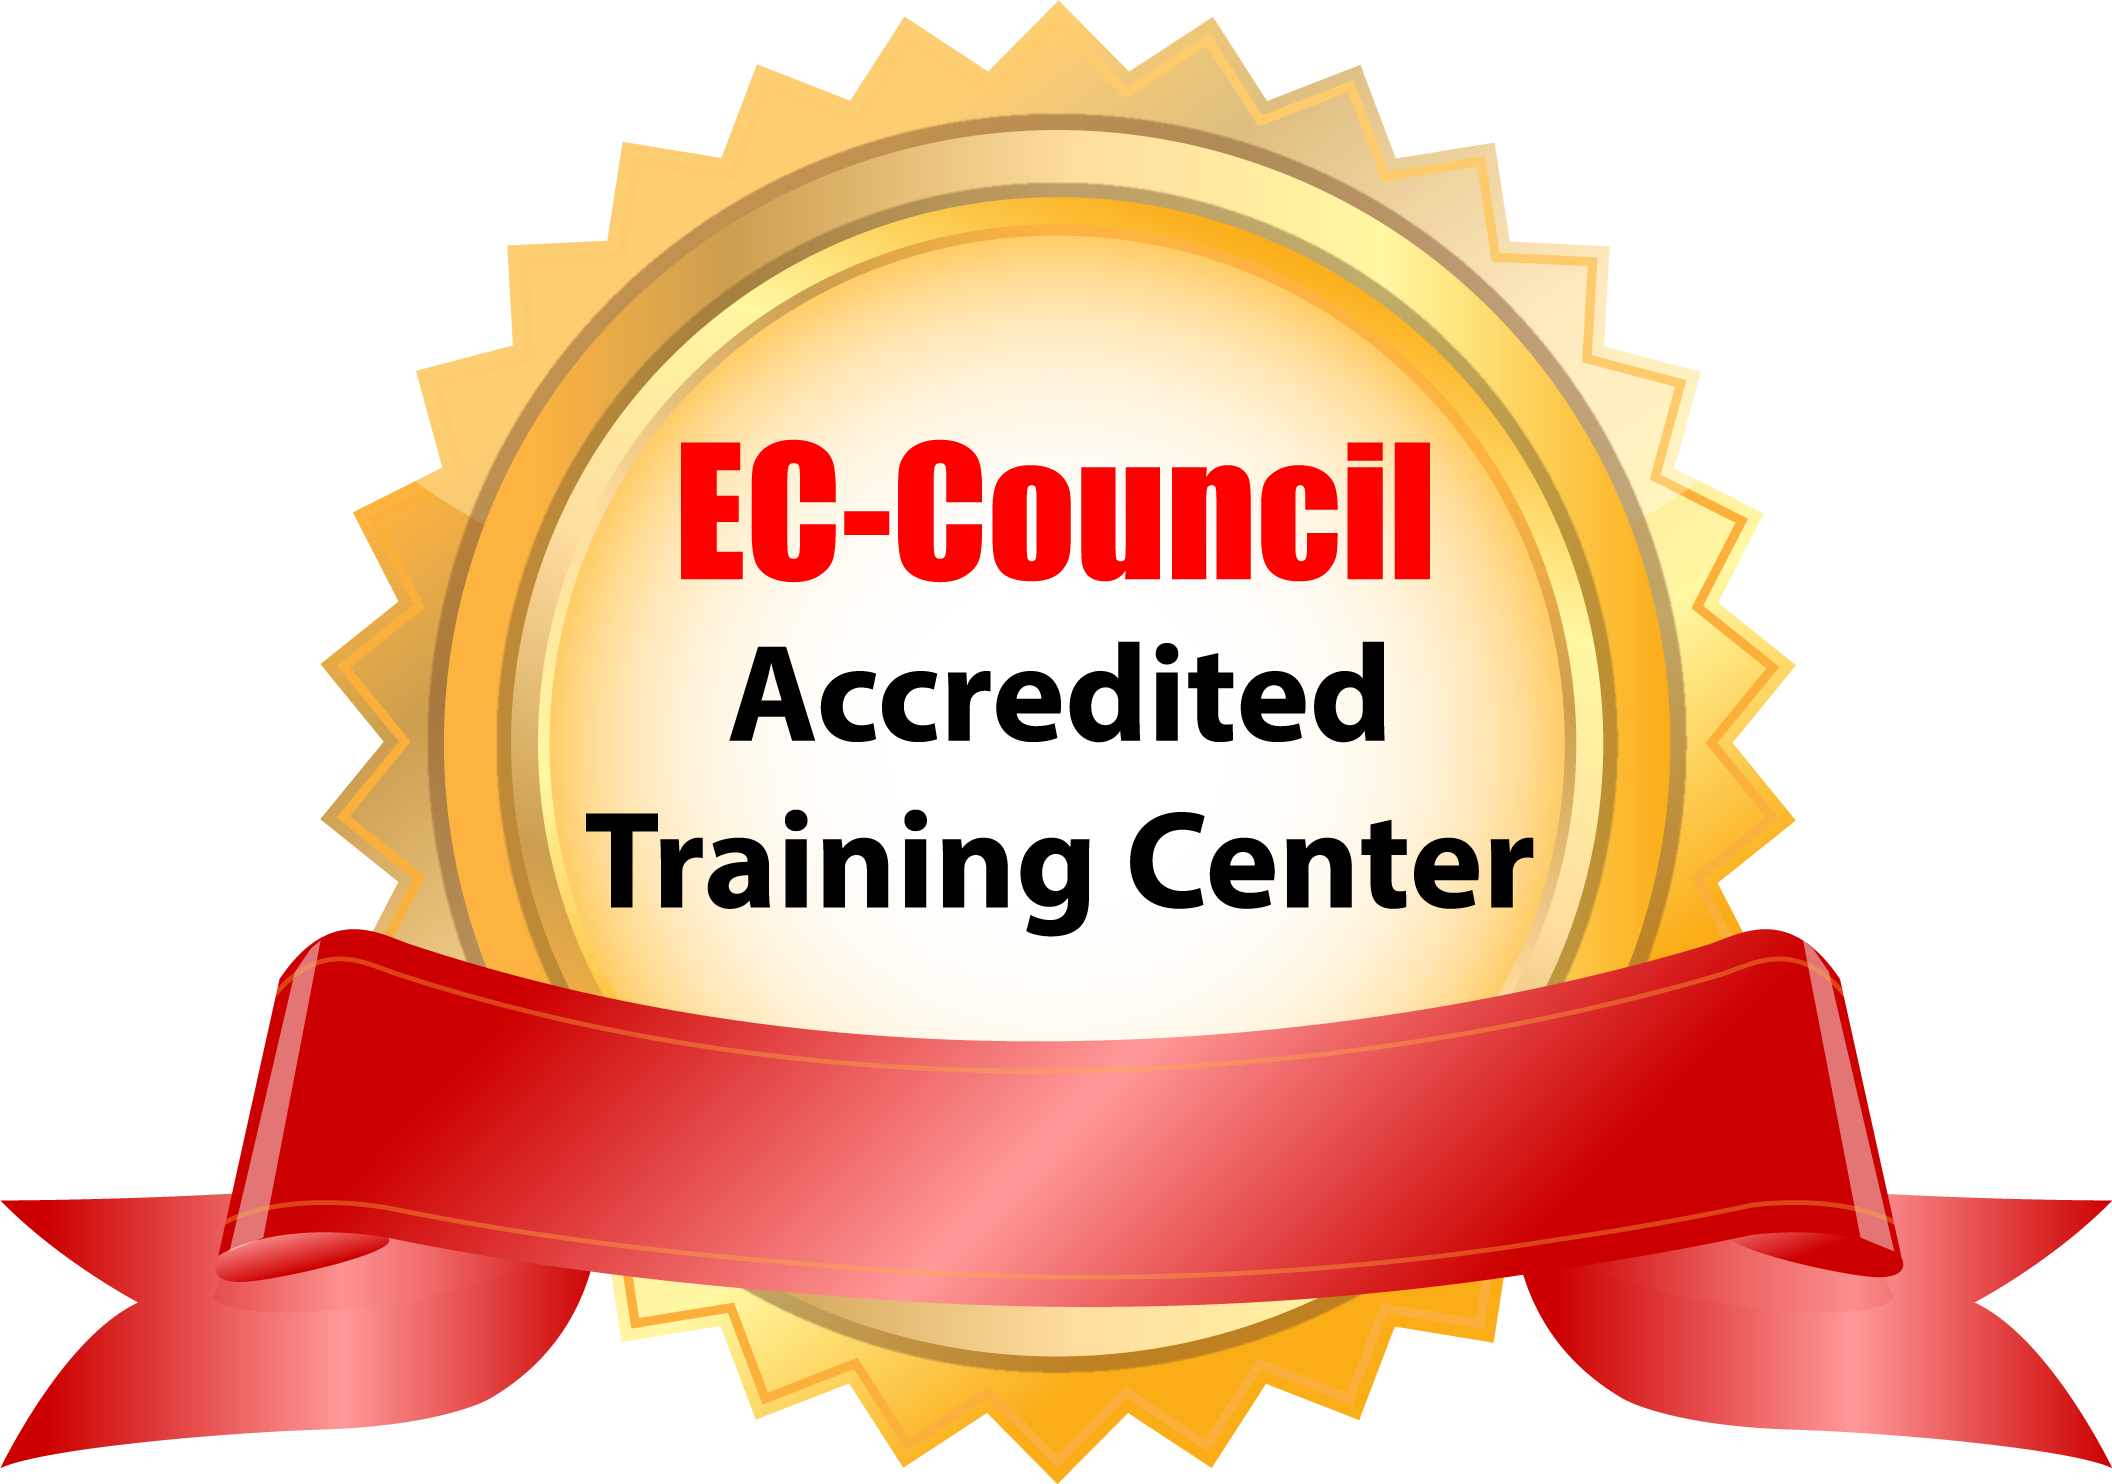 EC Council Accredited Training Center